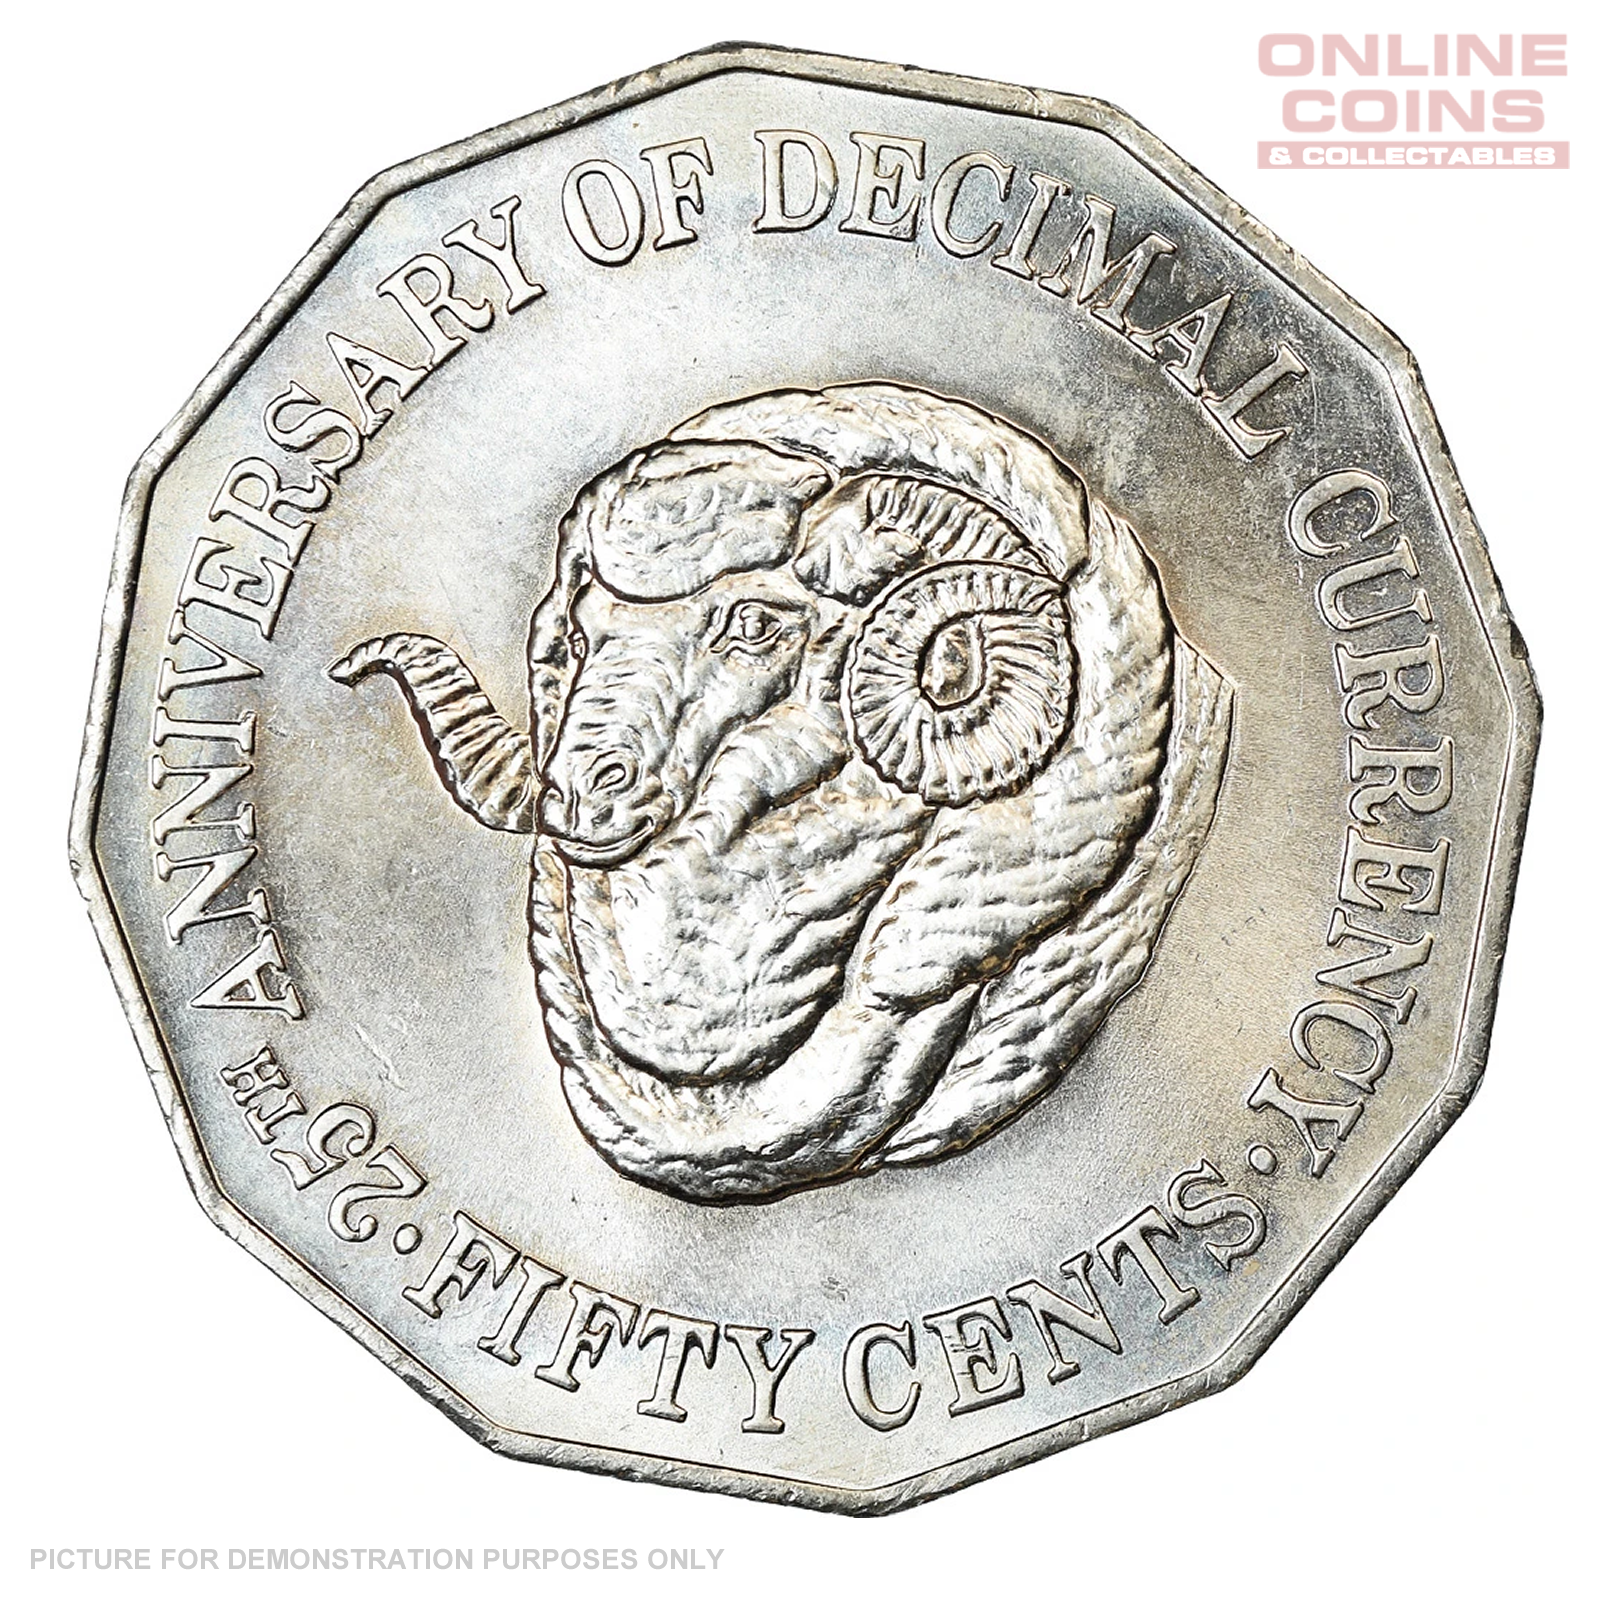 1991 Circulated Loose 50c Coin - Celebrating The 25th Anniversary Of Decimal Currency